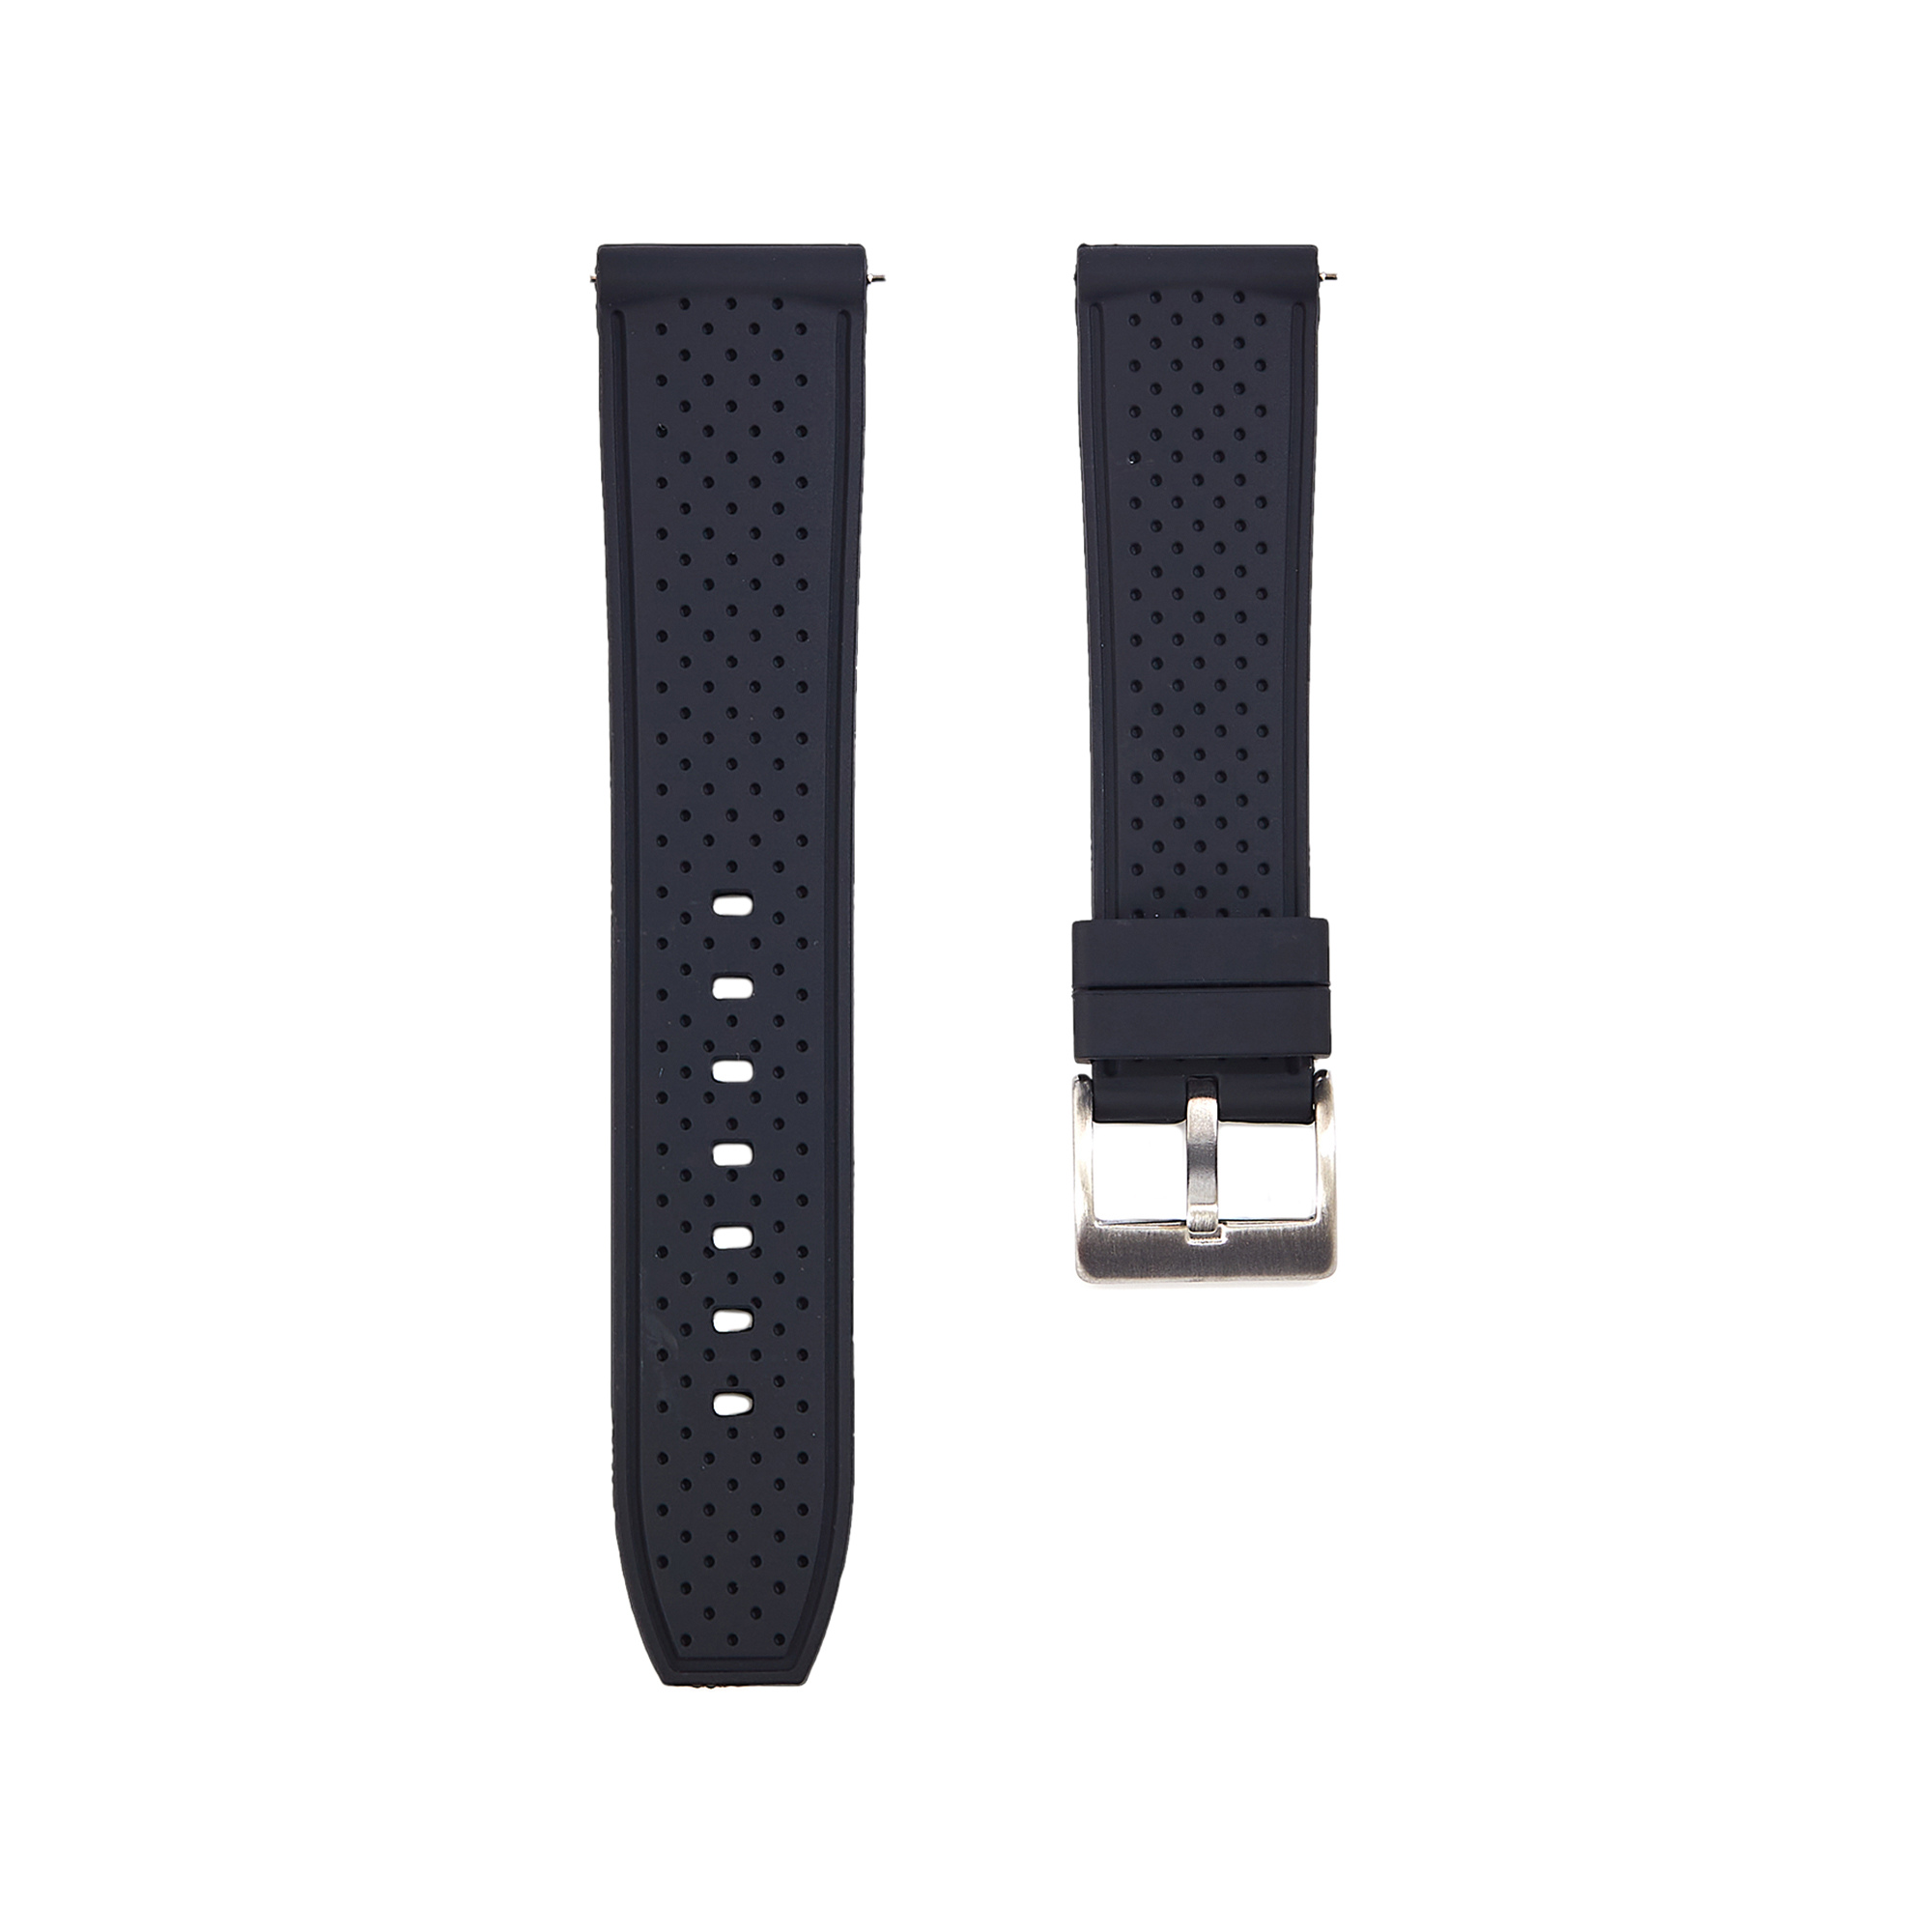 Perforated Stitch Soft Silicone Strap - Quick-Release - Black with No Stitch (2401)